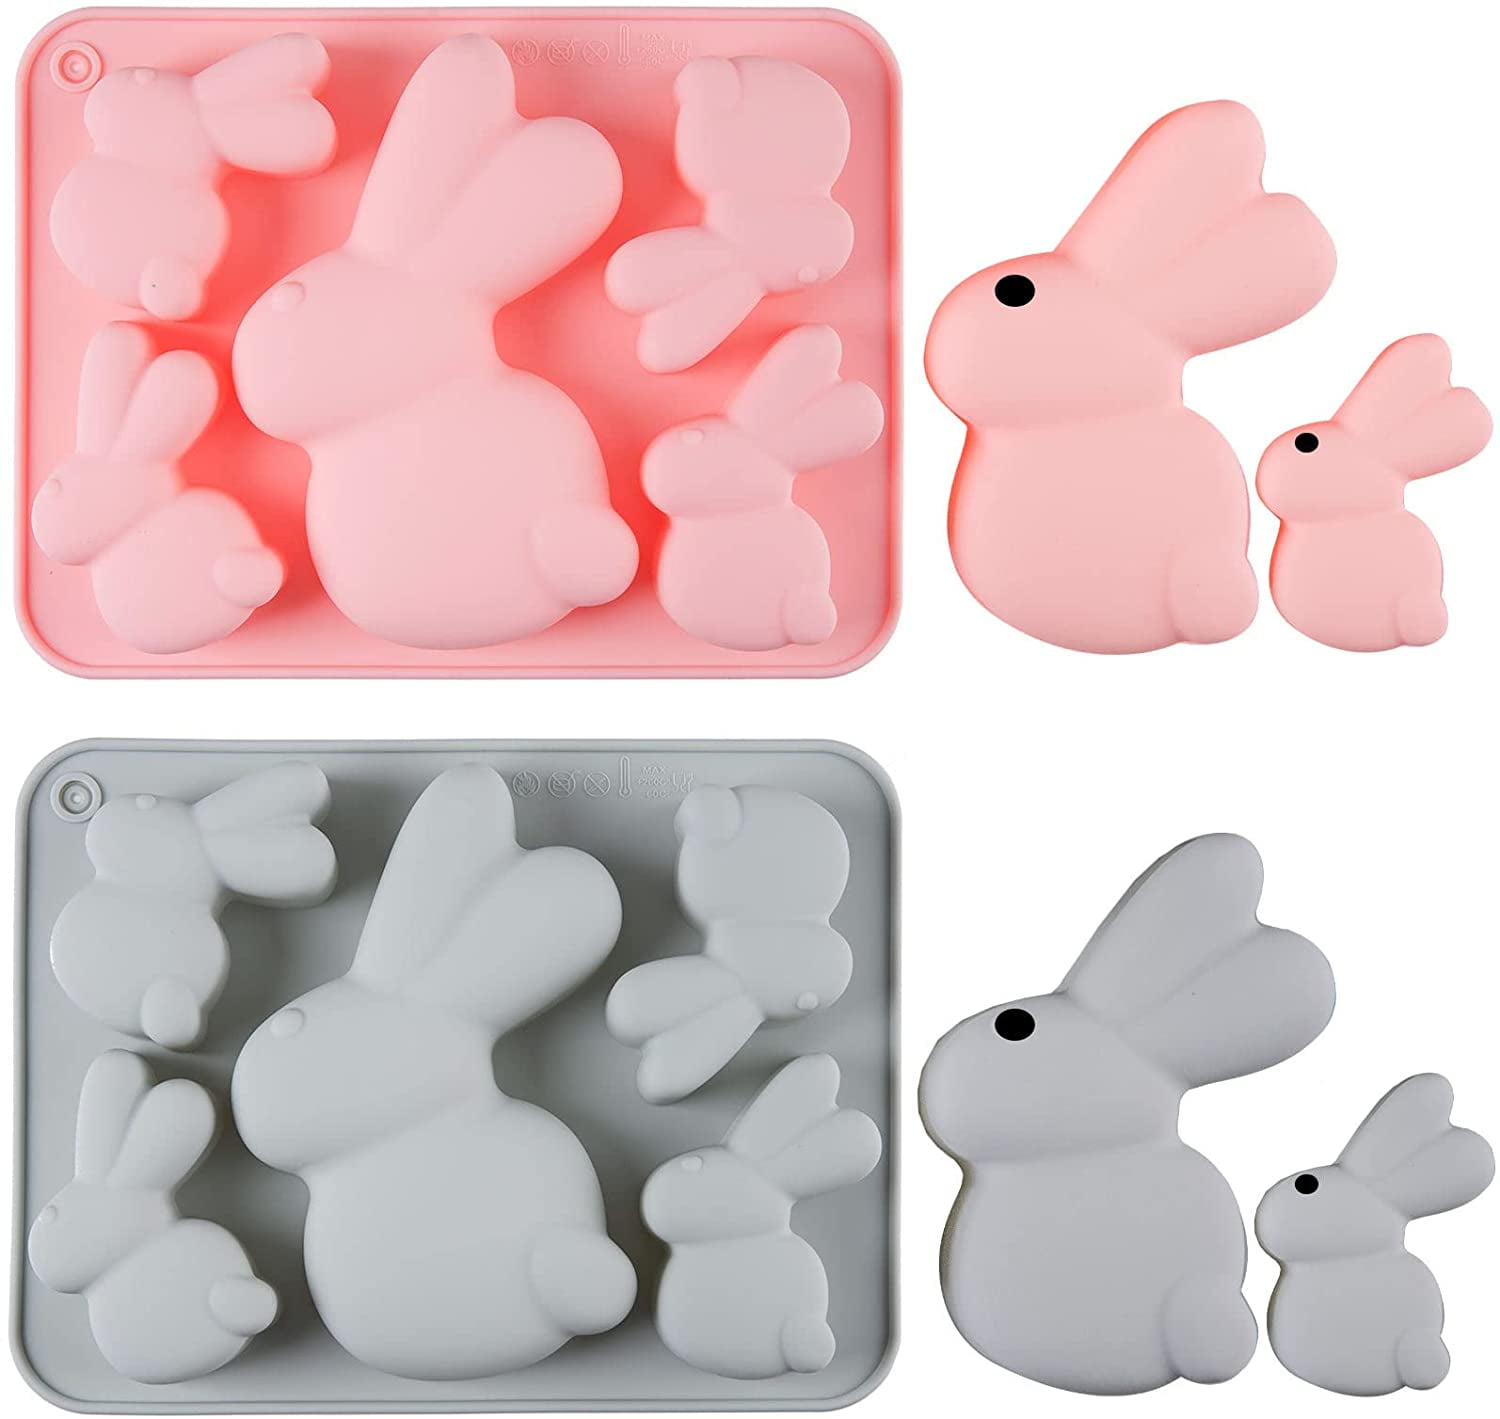 3D Rabbit Easter Bunny Silicone Mold Cupcake Fondant Cake Cookie Baking Mould